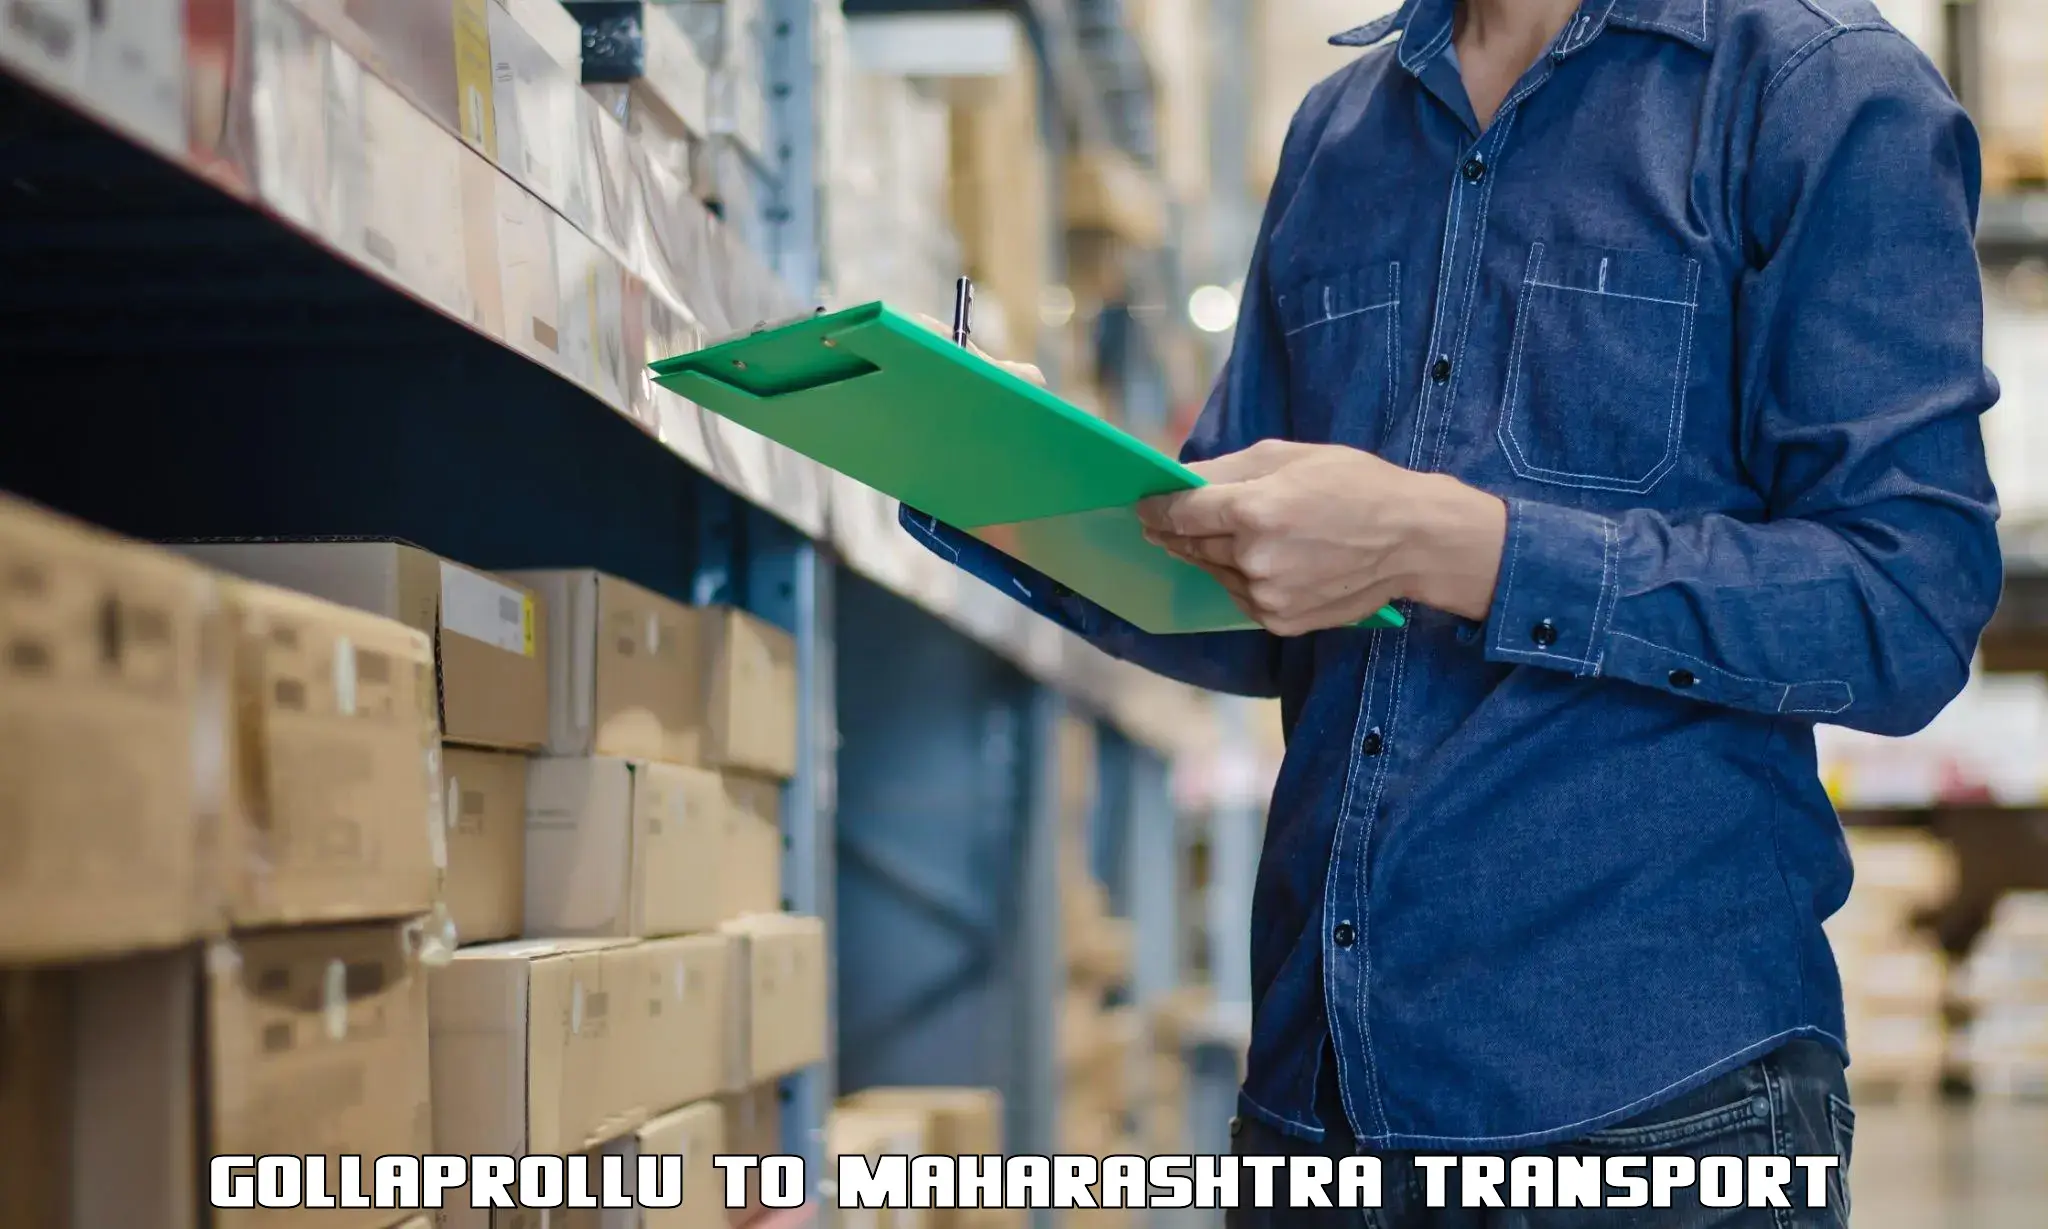 Air freight transport services Gollaprollu to Borivali